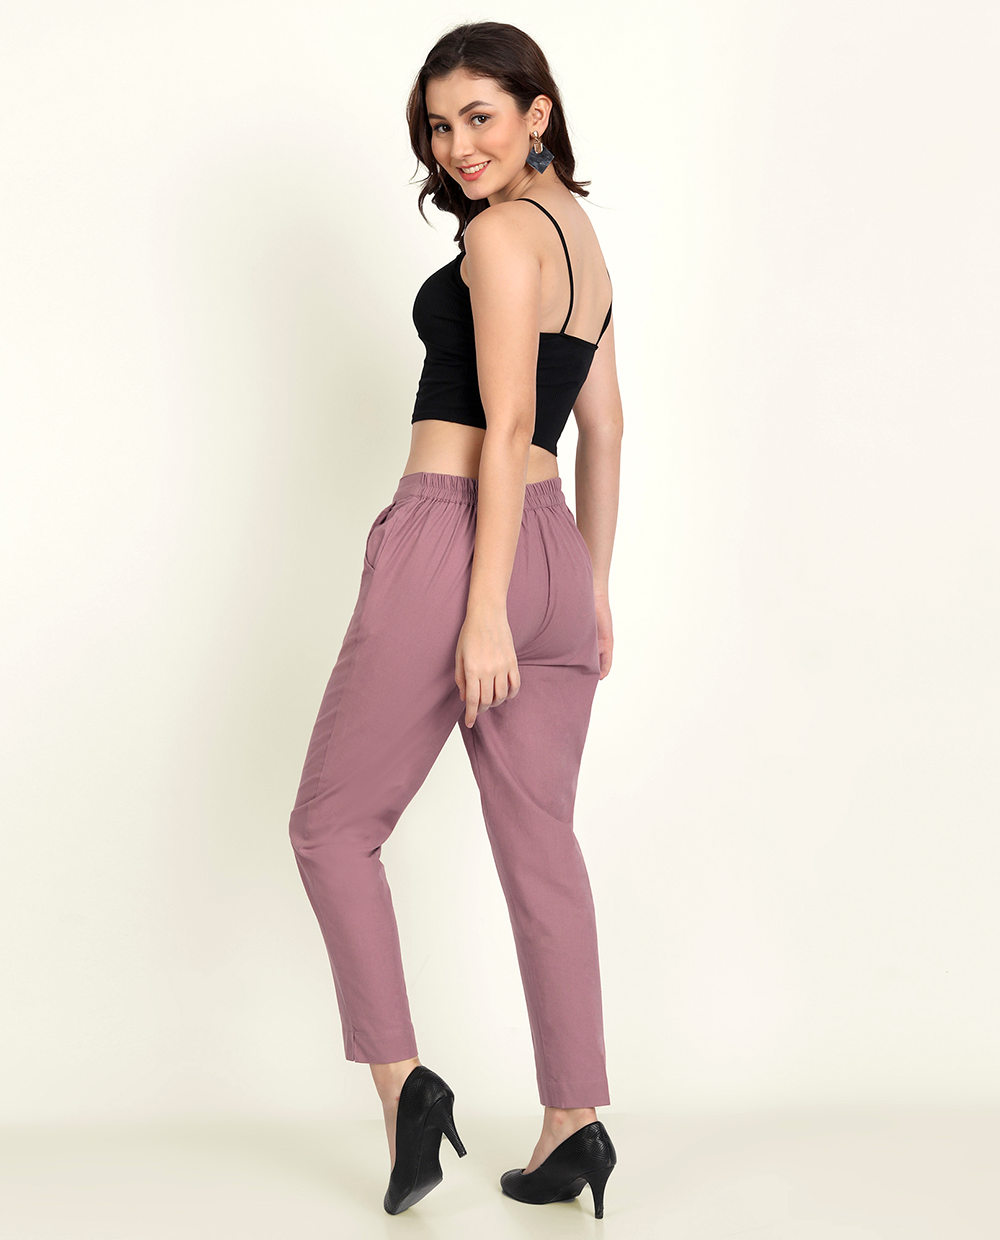 Buy Rose Taupe Color Cotton Trousers for Women  Regular Fit Cotton  Naariy